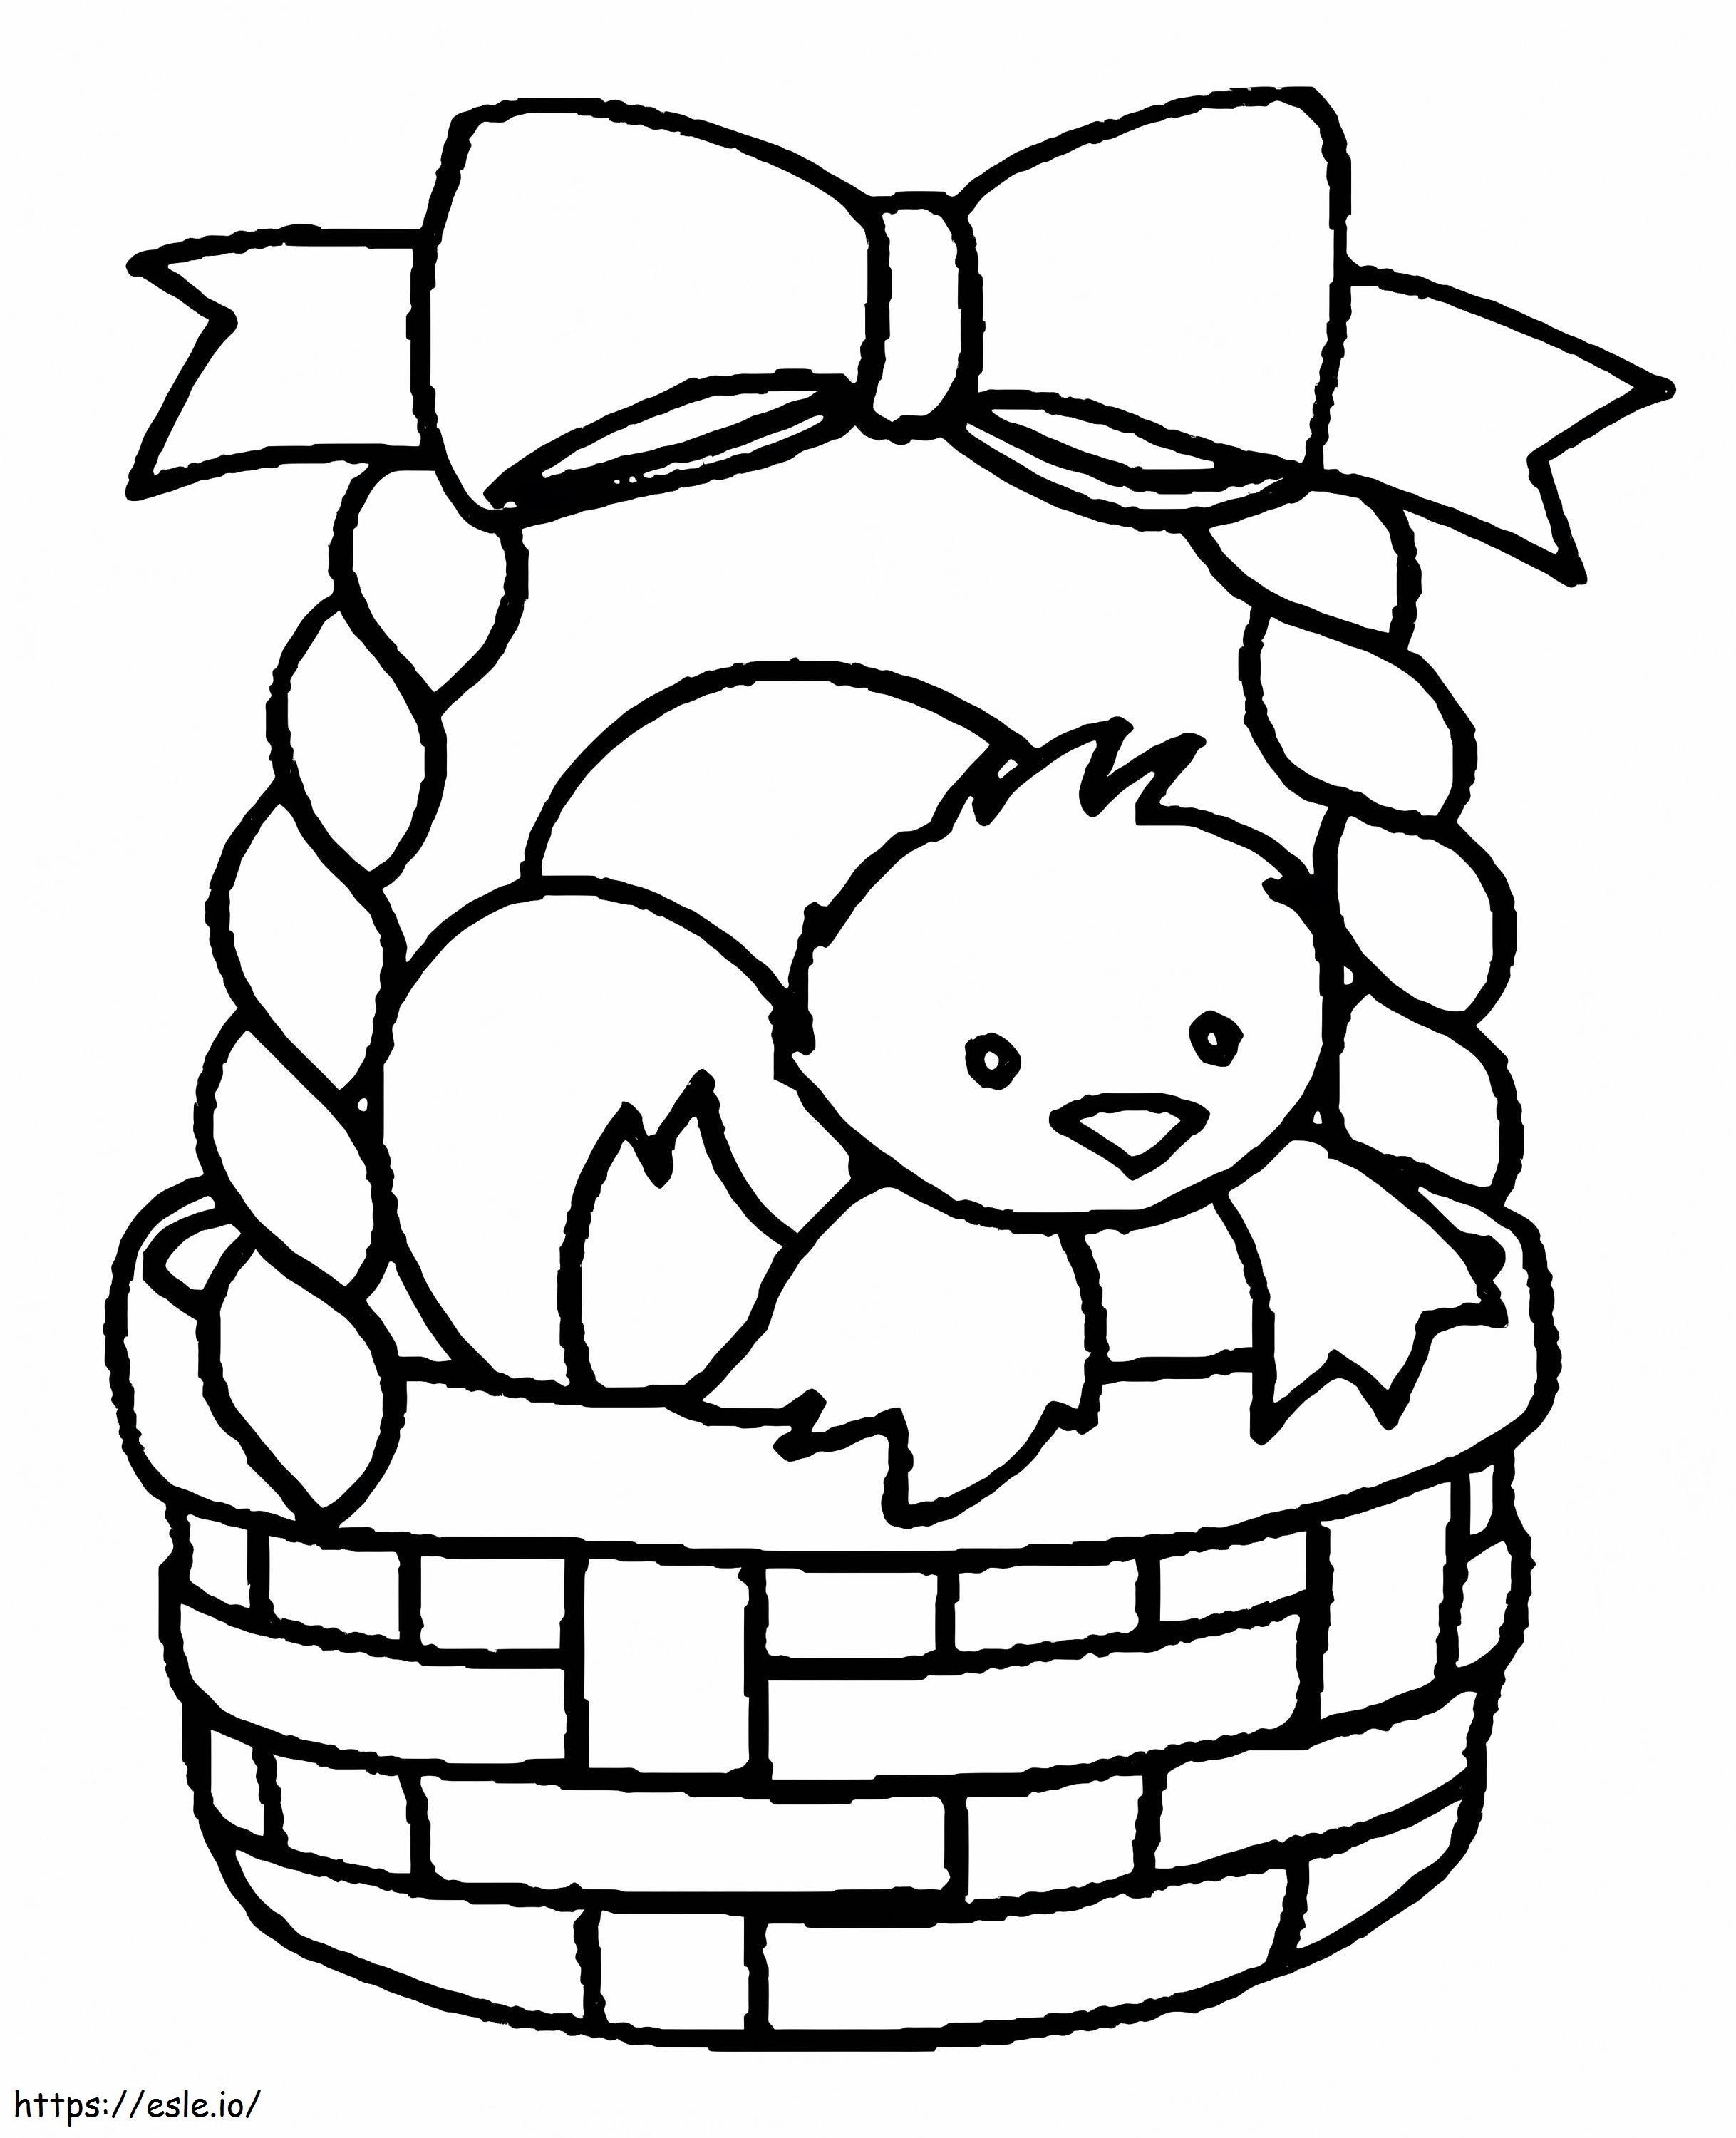 Easter Basket With Little Chick coloring page